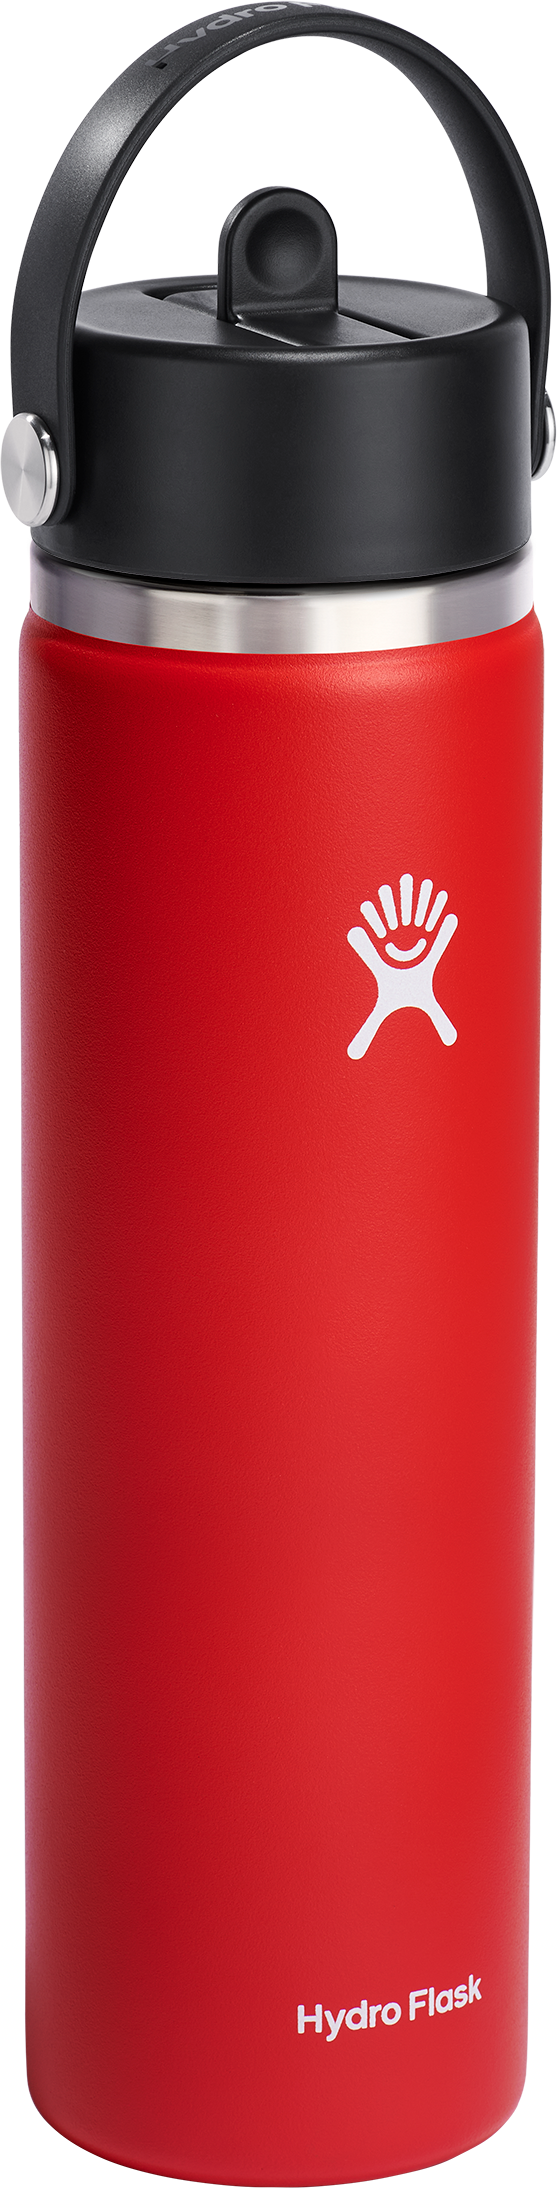 Hydro Flask 32 oz. Wide Mouth Bottle with Flex Straw Cap, Lupine